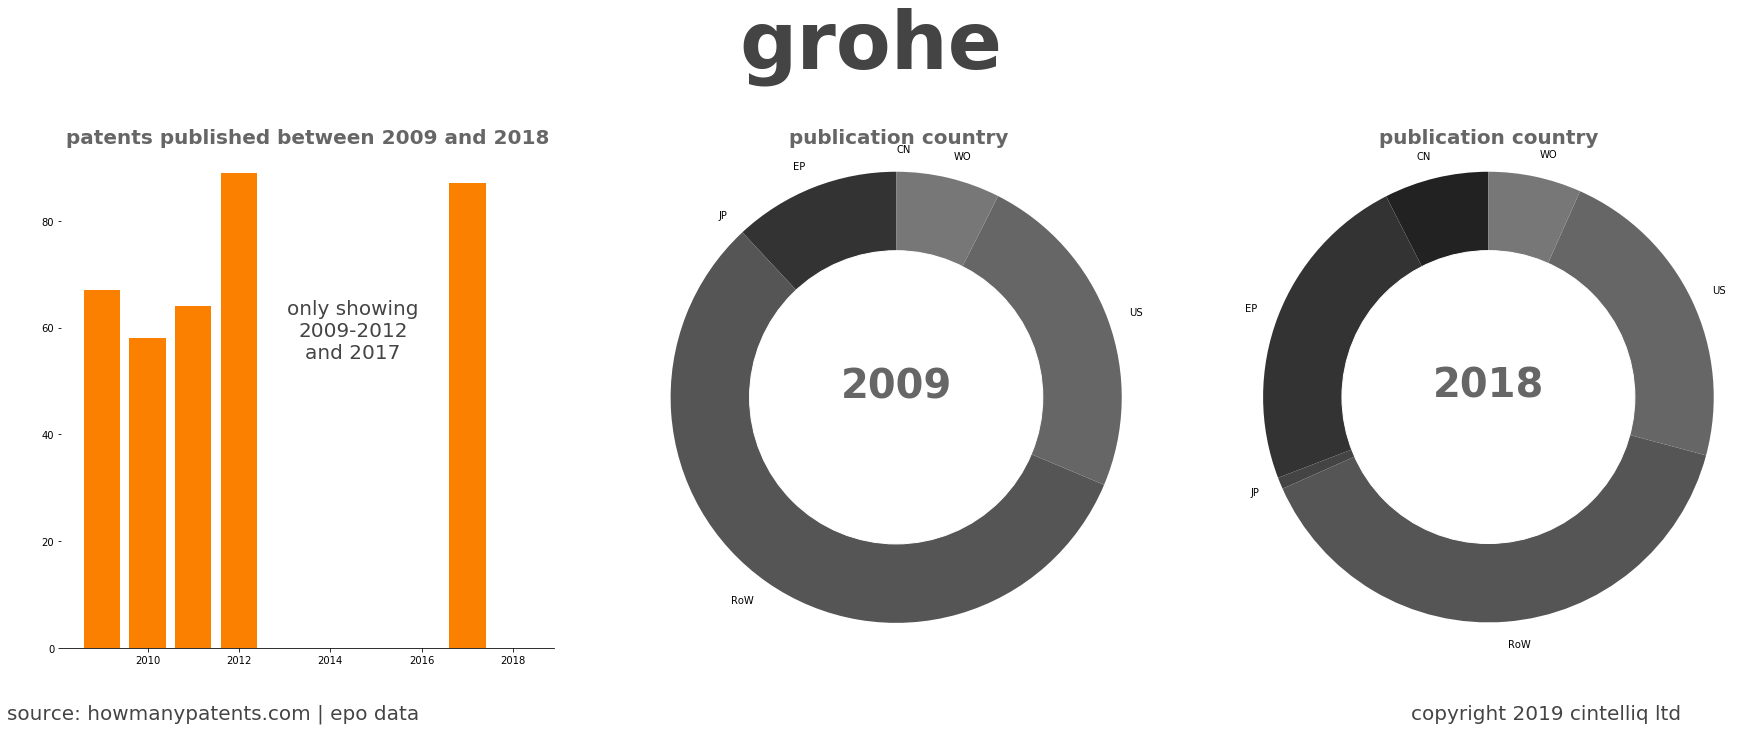 summary of patents for Grohe